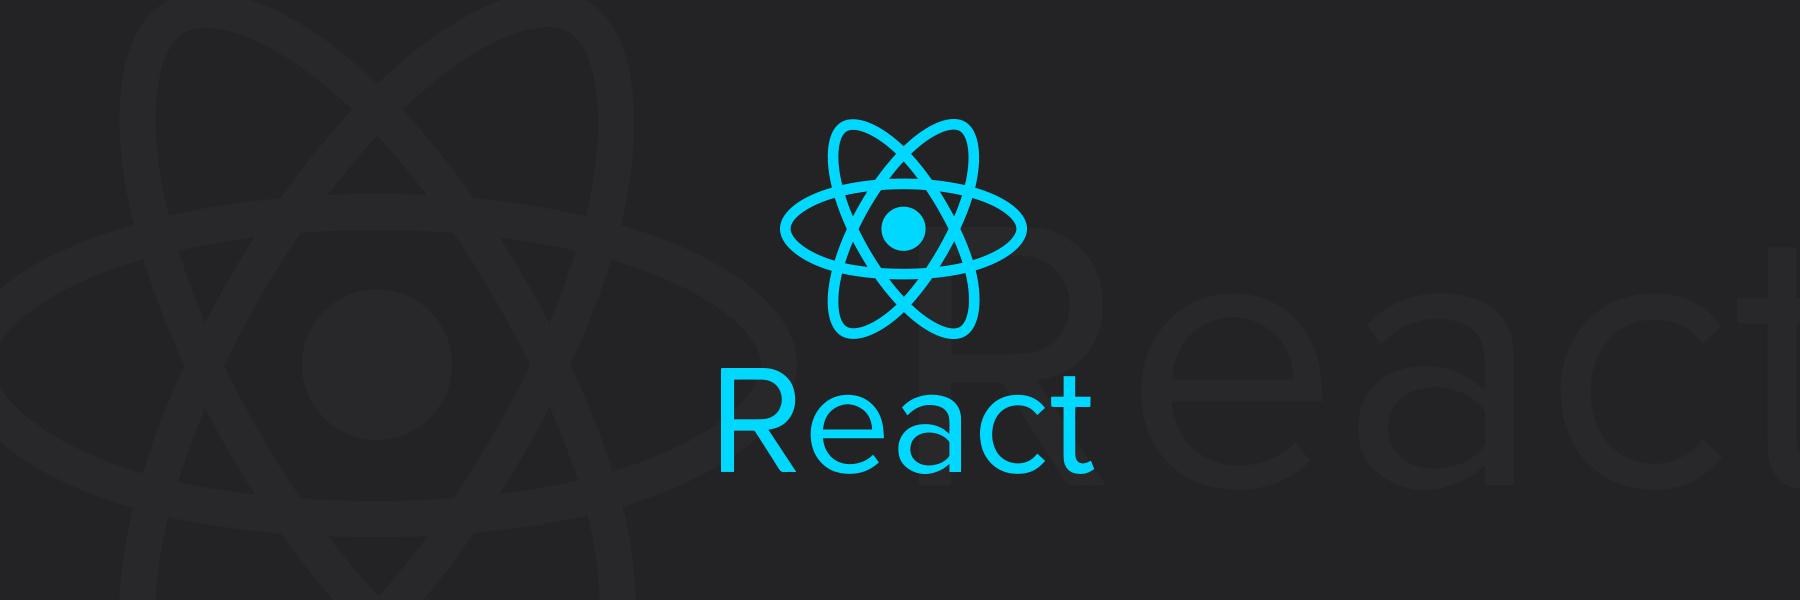 How to add text editor in React JS? | TinyMCE